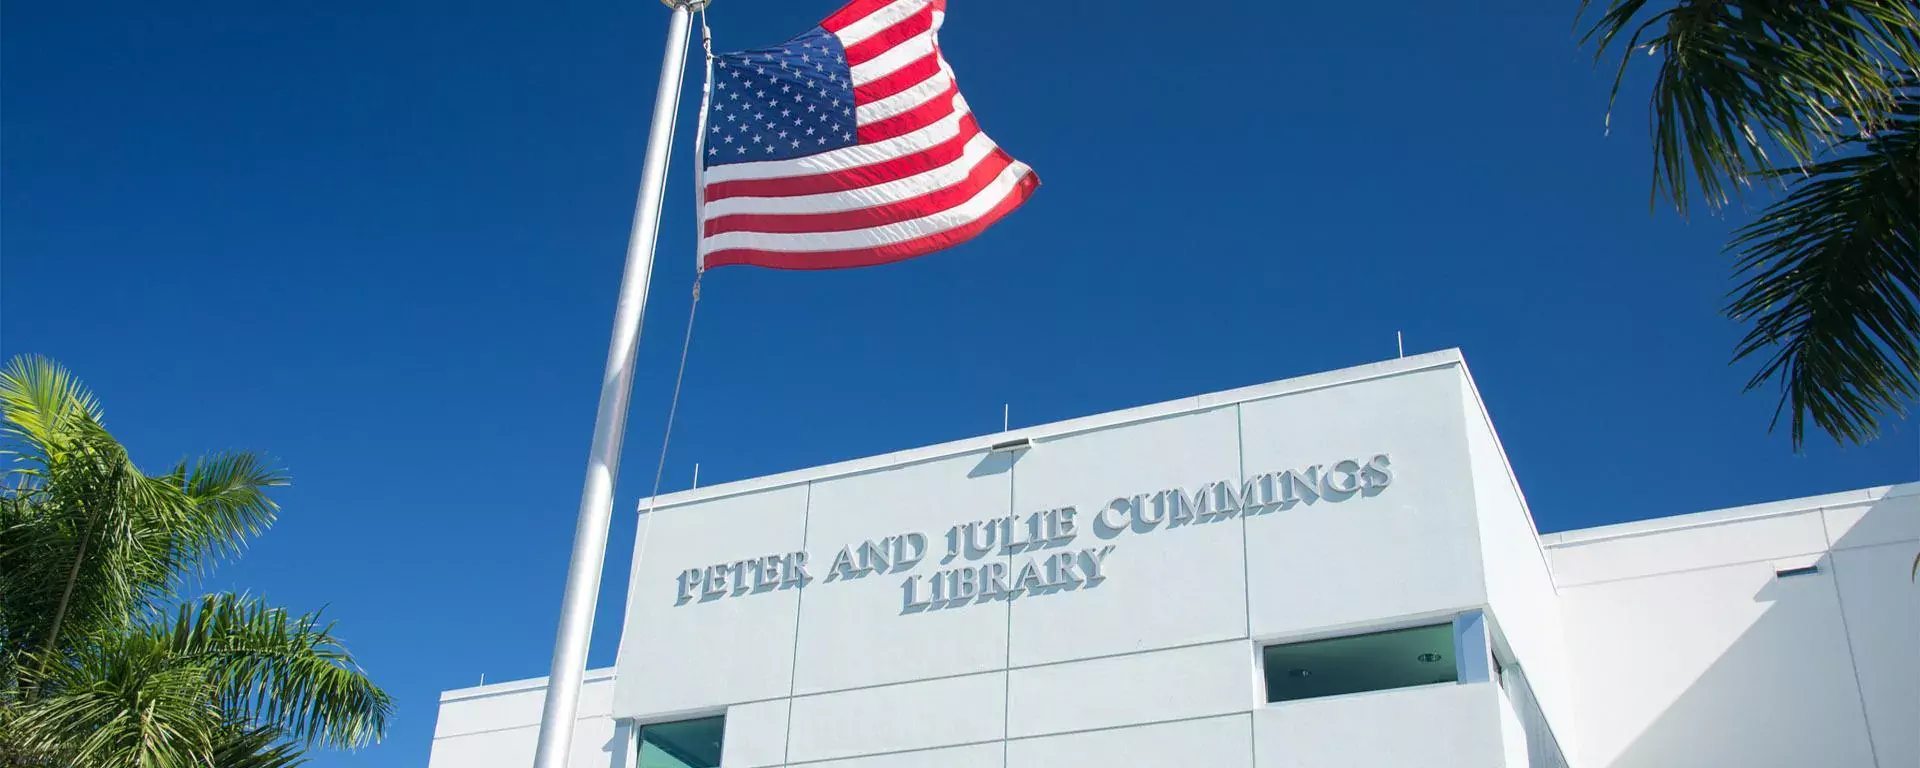 Image of the exterior of the Peter and Julie Cummings Library